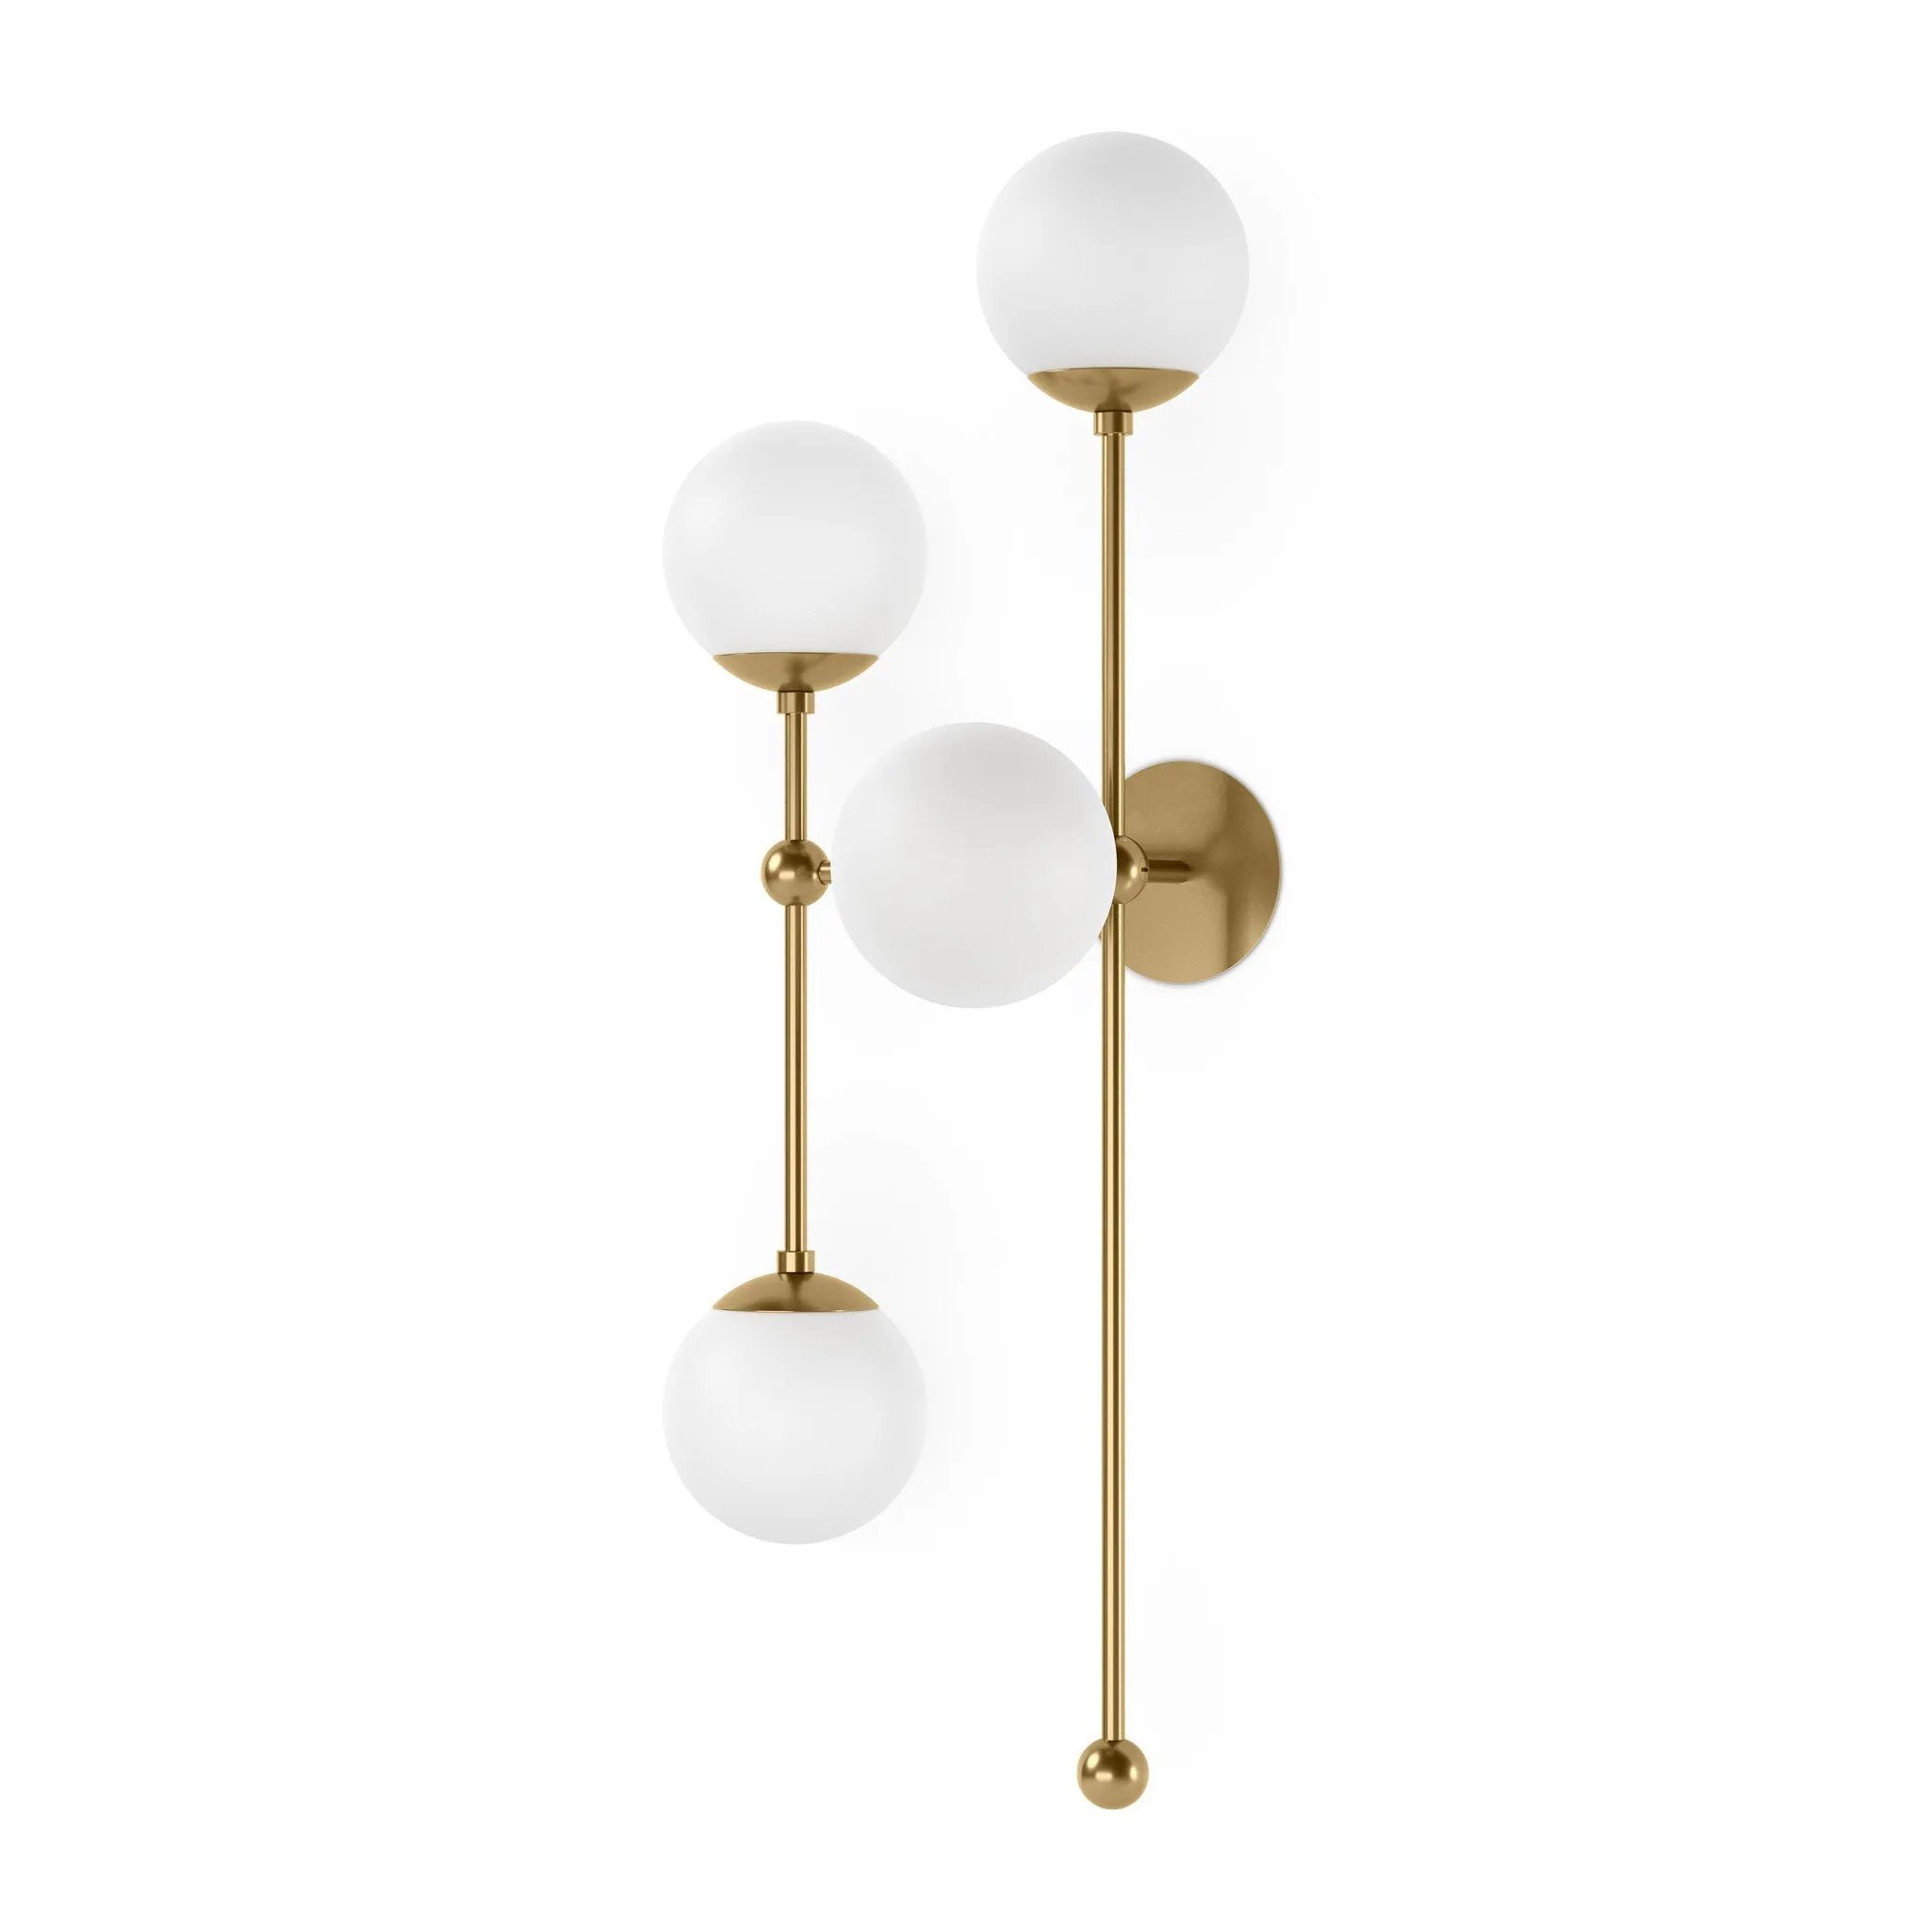 Matte glass spheres seem to extend and reach across smooth brass rods. Each globe is individually blown, shaped and sculpted by hand through a one-hour process. Matte globes are specially manufactured to evenly diffuse light. Brass and glass are 98% recyclable. Designed and sustainably made in Poland by Schwung.Overall Dimensions13.75"w x 13. Amethyst Home provides interior design, new home construction design consulting, vintage area rugs, and lighting in the Dallas metro area.